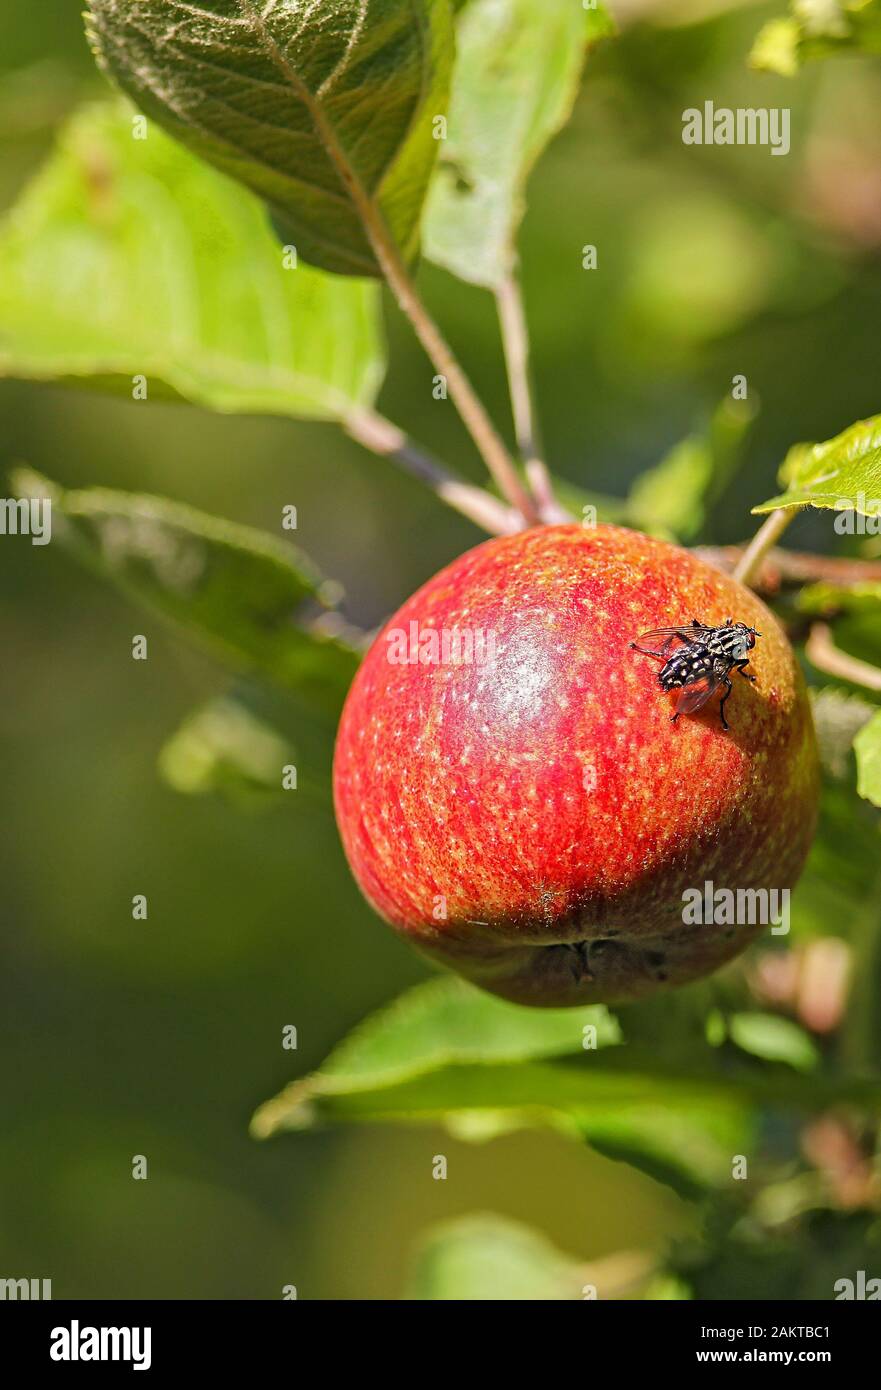 Blowfly sitting on red apple (Pyrus malus) on apple tree in the sun, Mecklenburg-Western Pomerania, Germany Stock Photo